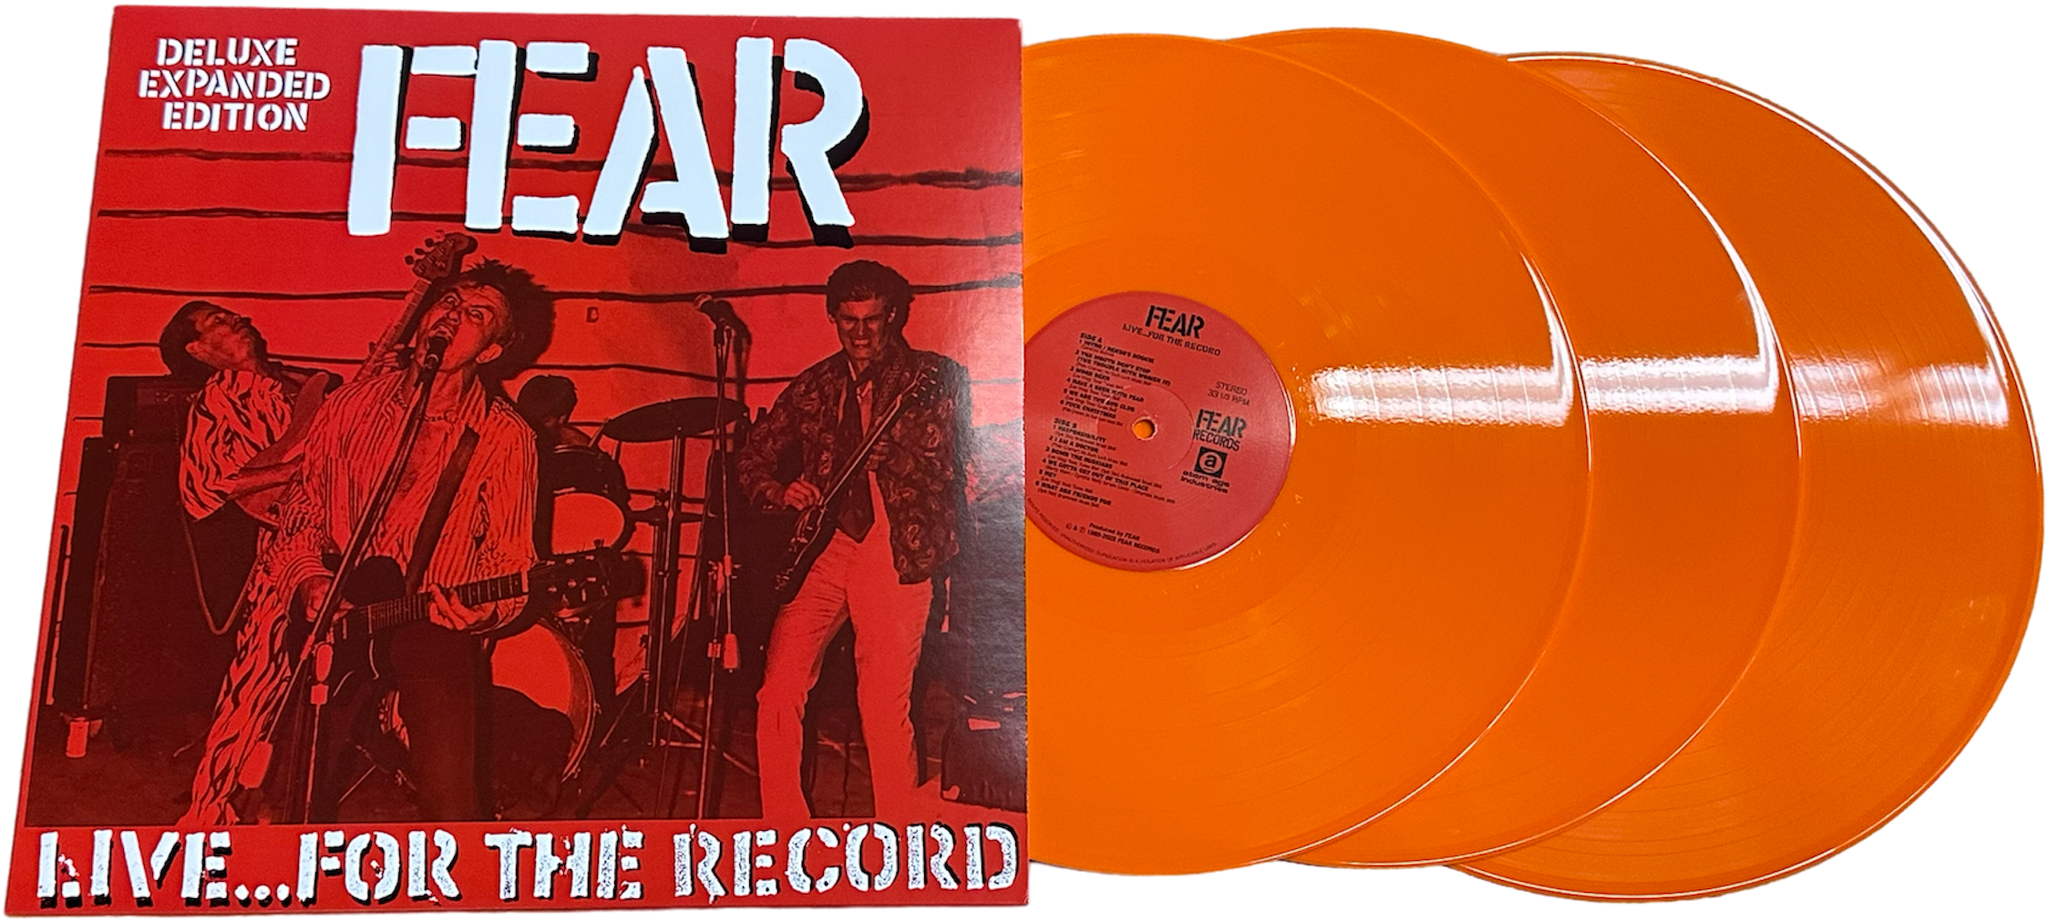 FEAR - "LIVE FOR THE RECORD" 30TH ANNIVERSARY LIMITED EDITION 3XLP